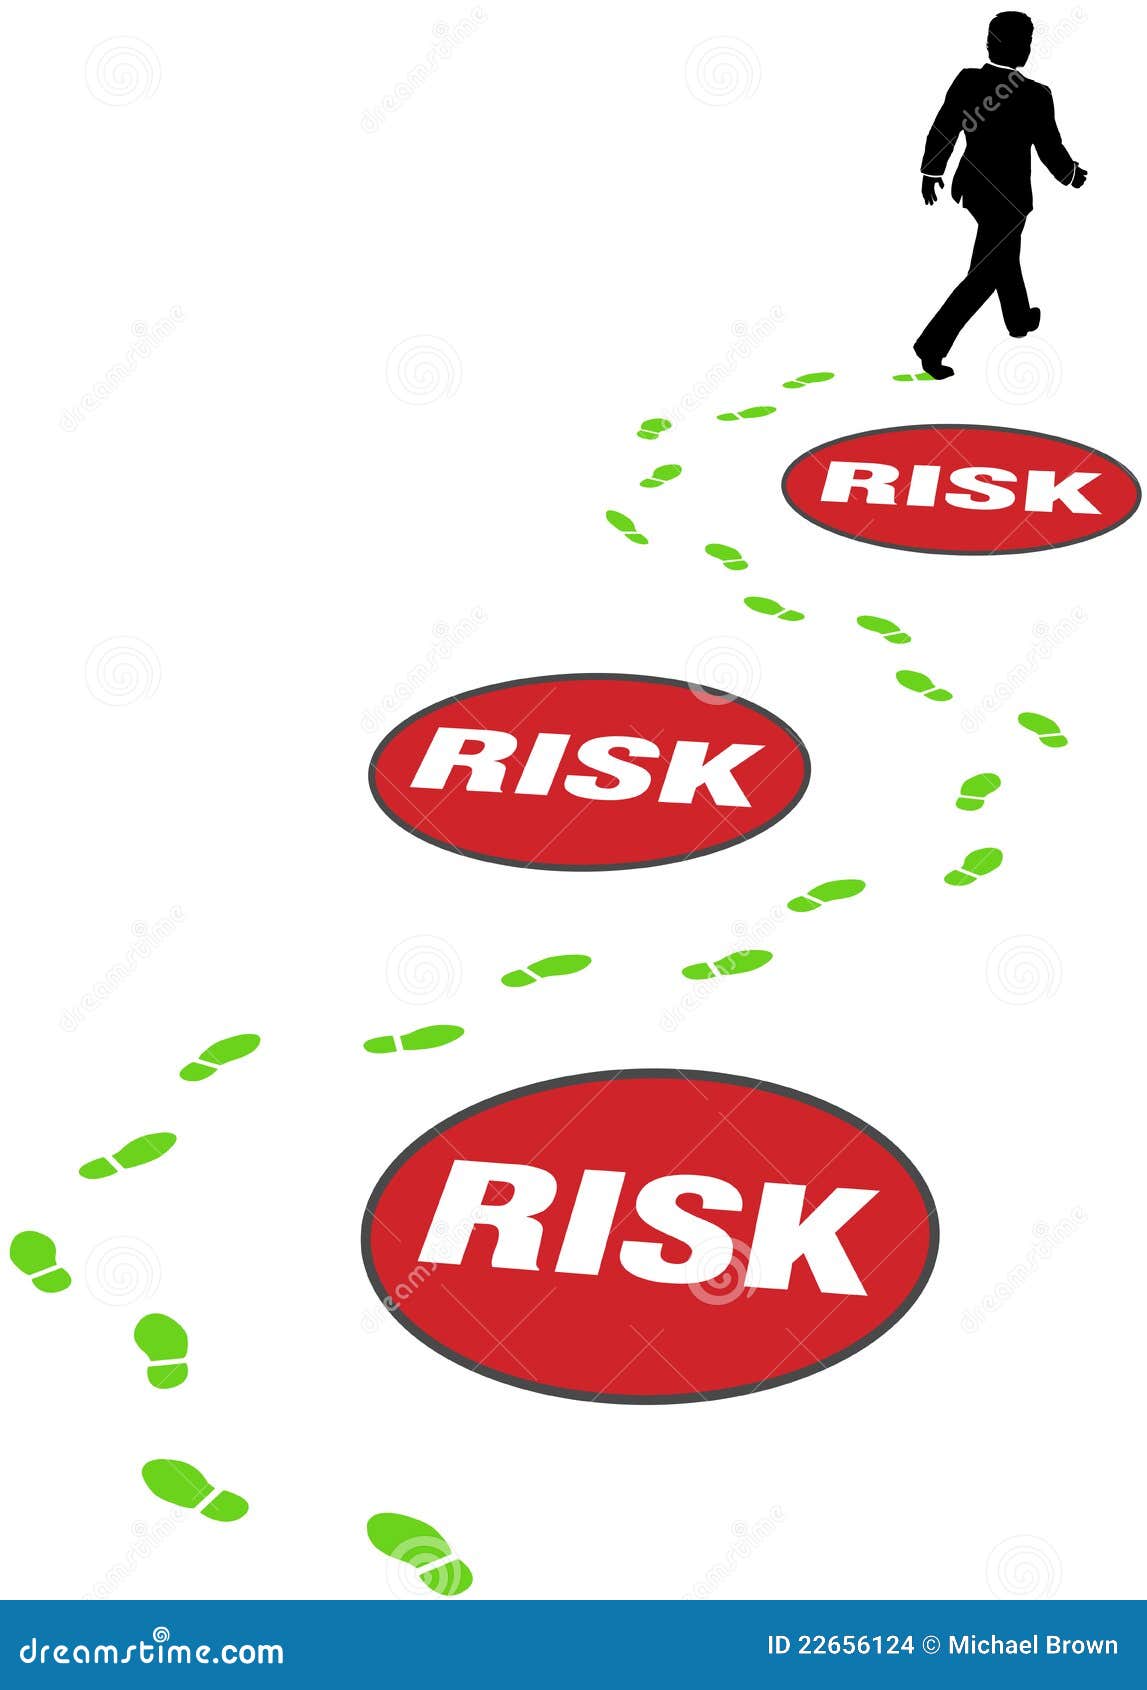 How can business plan helps in avoiding risk